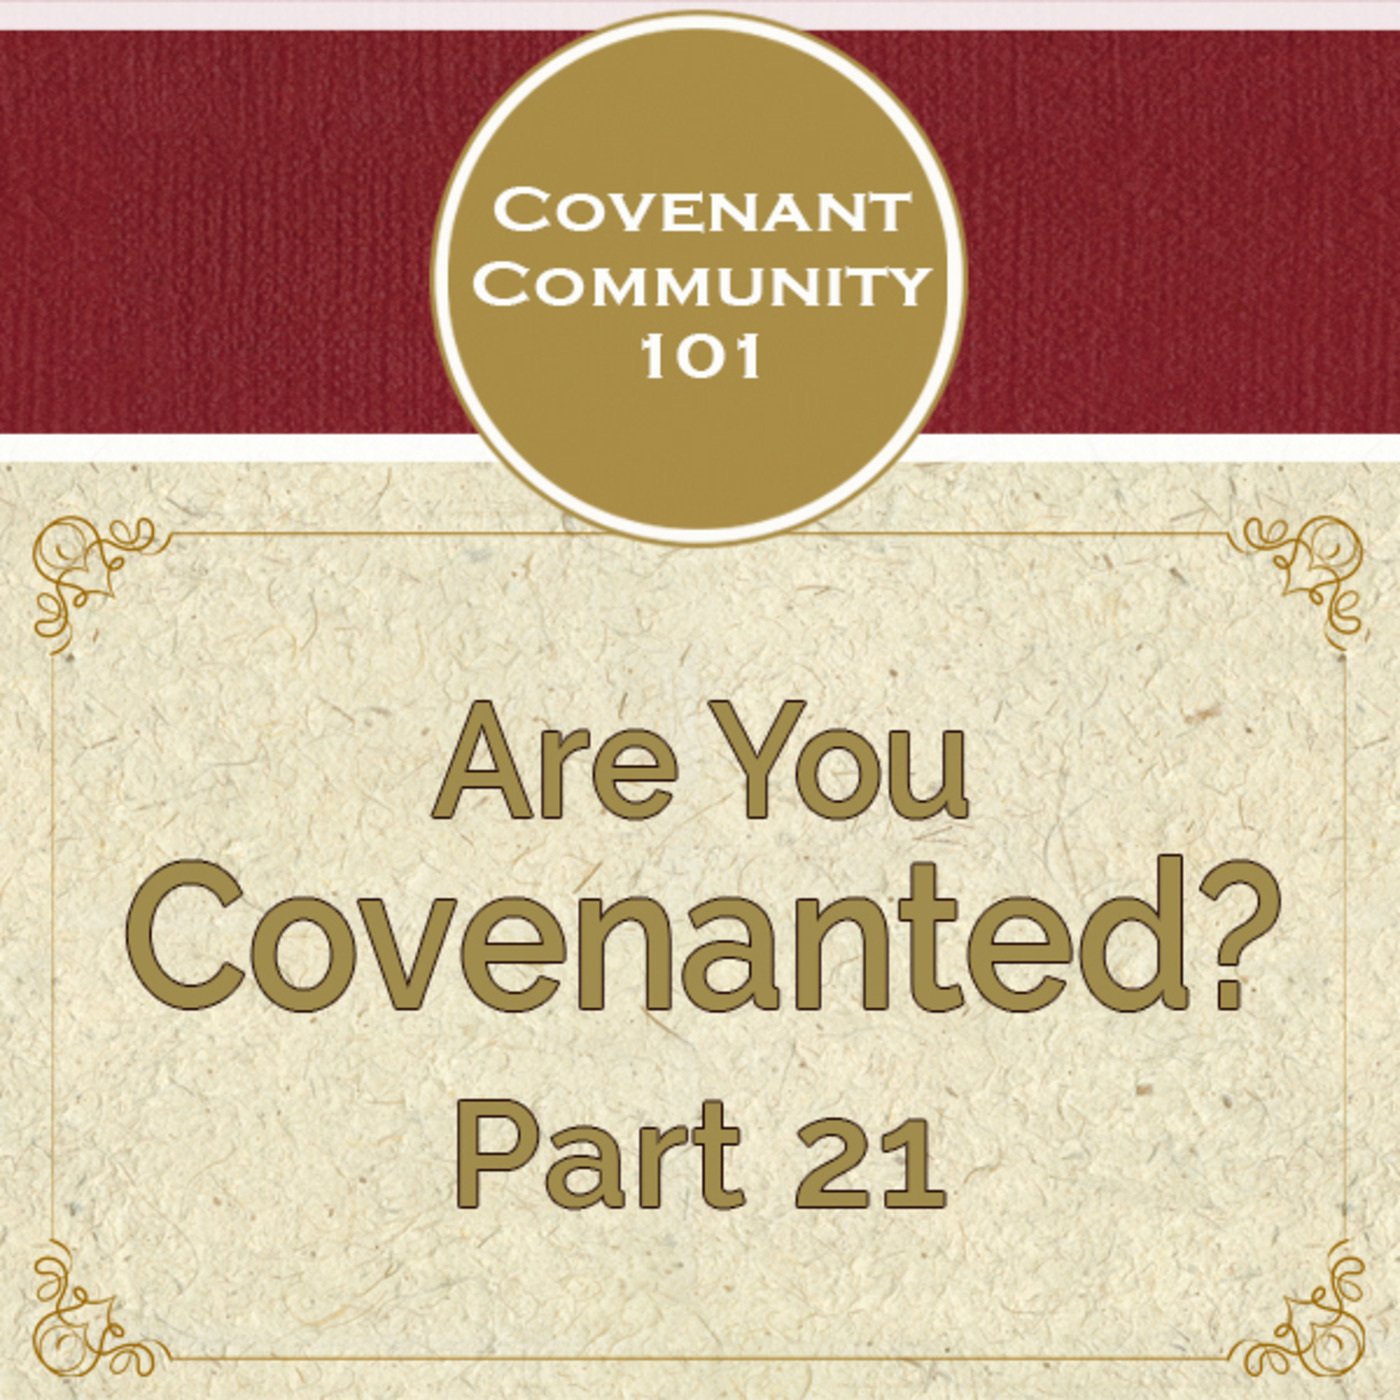 Covenant Community 101: Are You Covenanted? Part 21